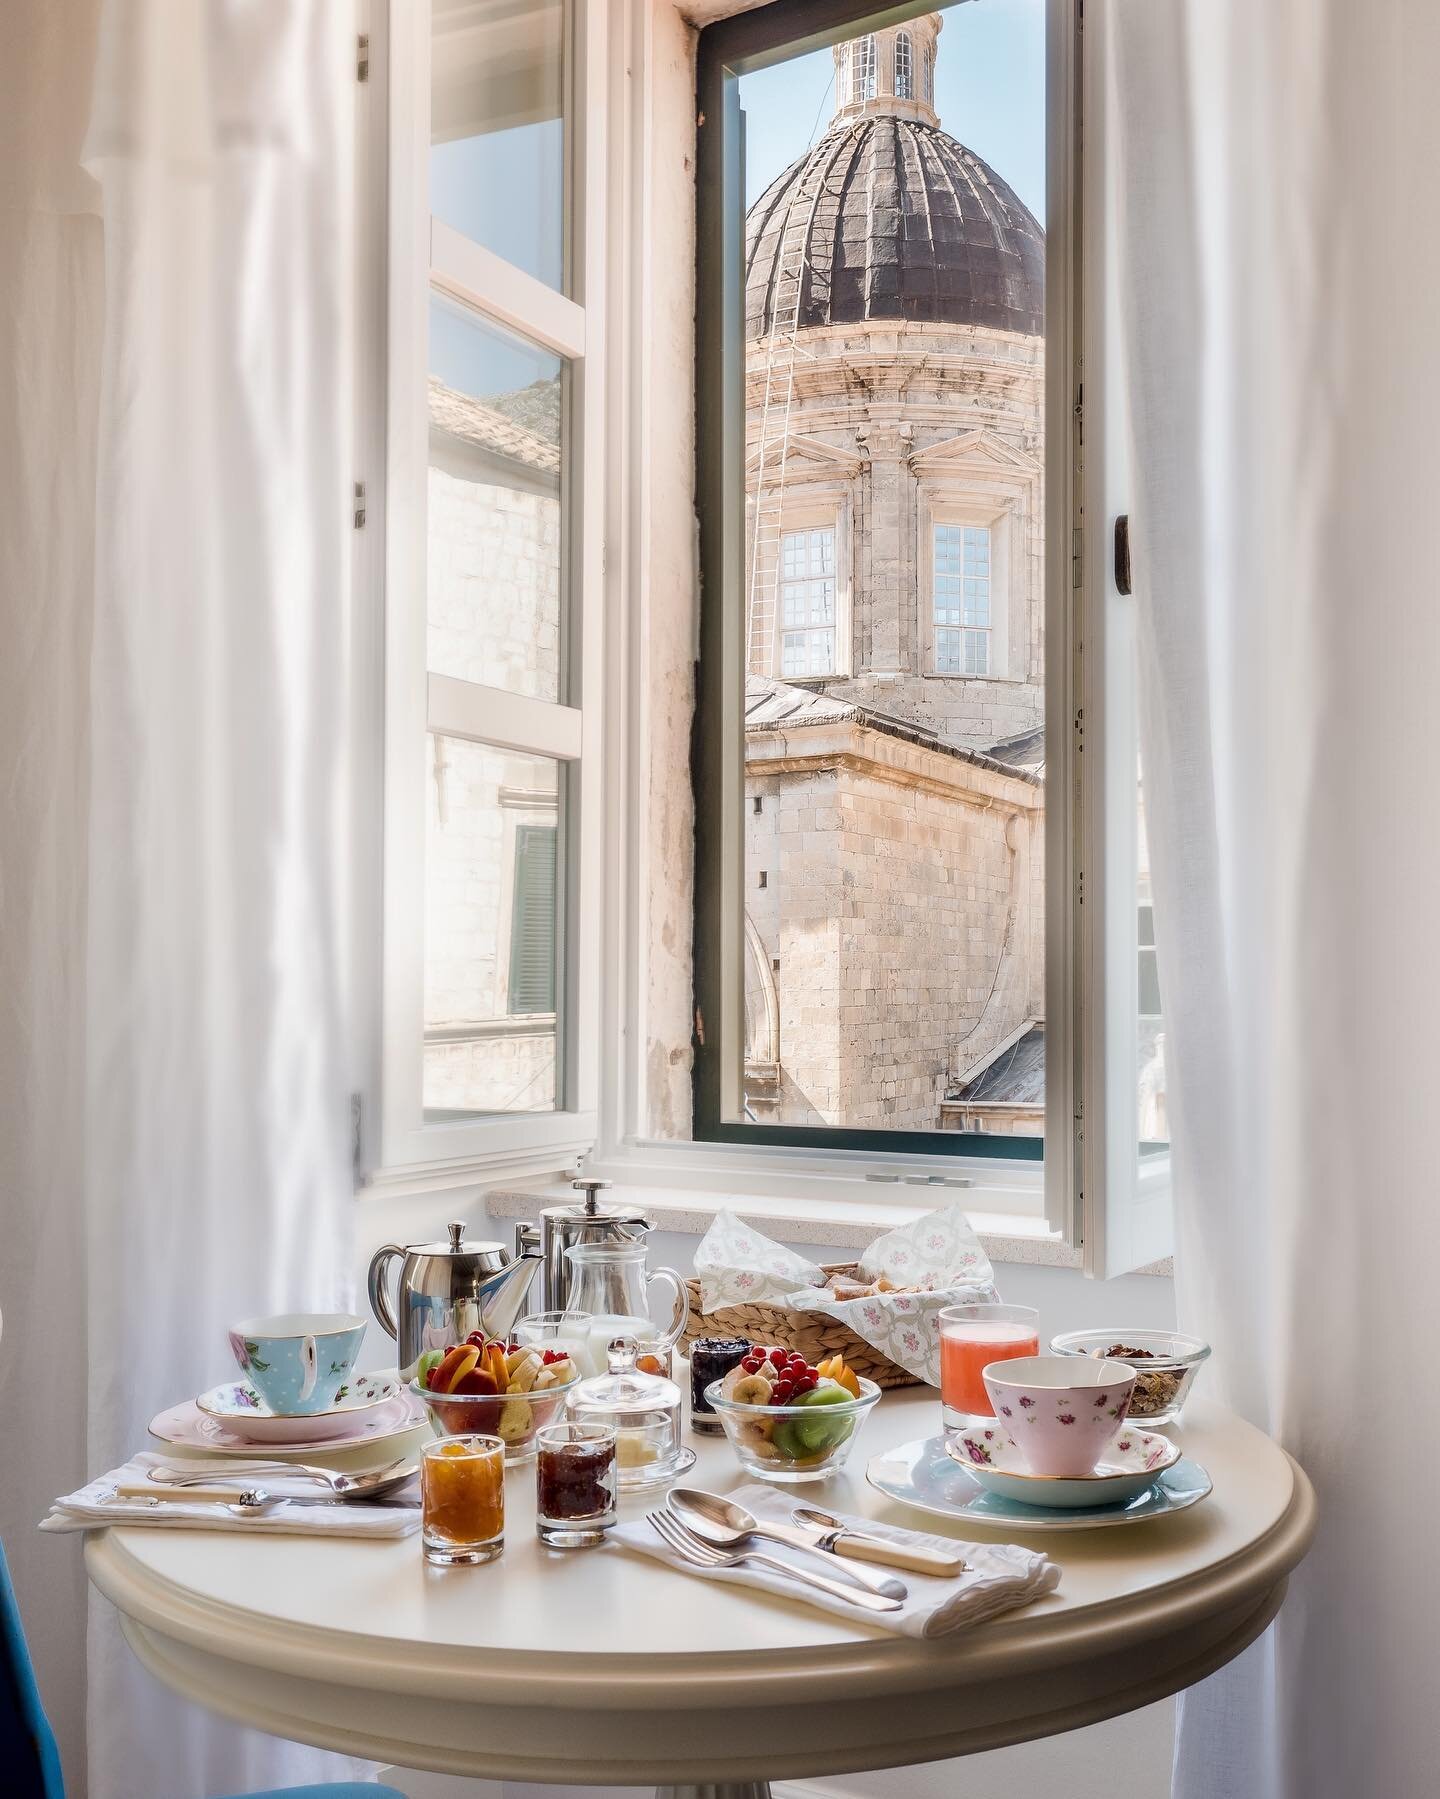 Now that's what we call breakfast with a view from our aptly named Cathedral Room. If you can see yourself here, sipping a coffee before heading out to explore we'd love to hear from you. #boutiqueaccomodation #weekendaway #minibreak #gameofthrones #